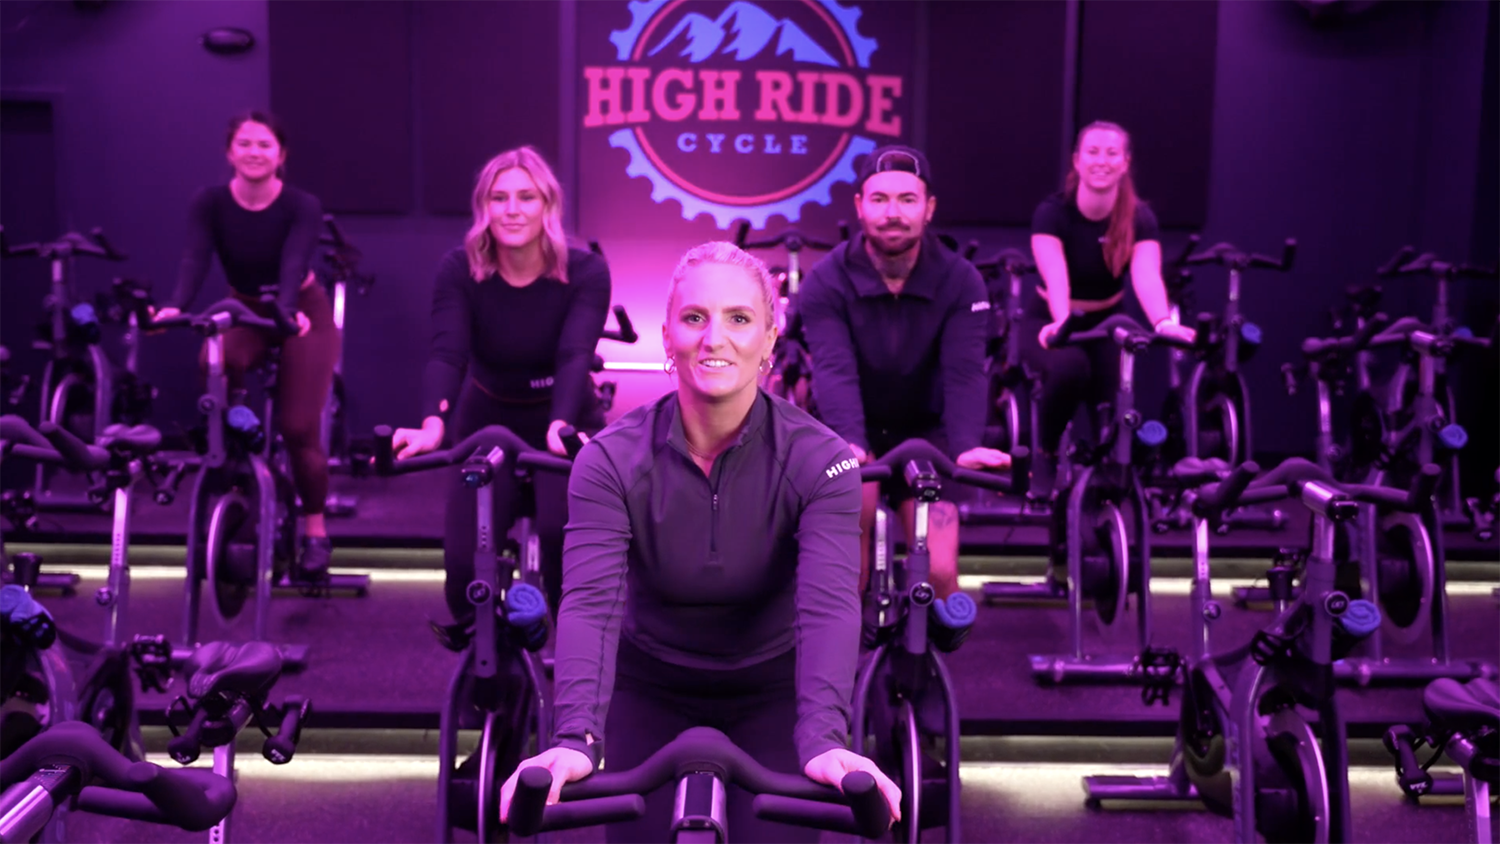 High Ride Cycle Experience